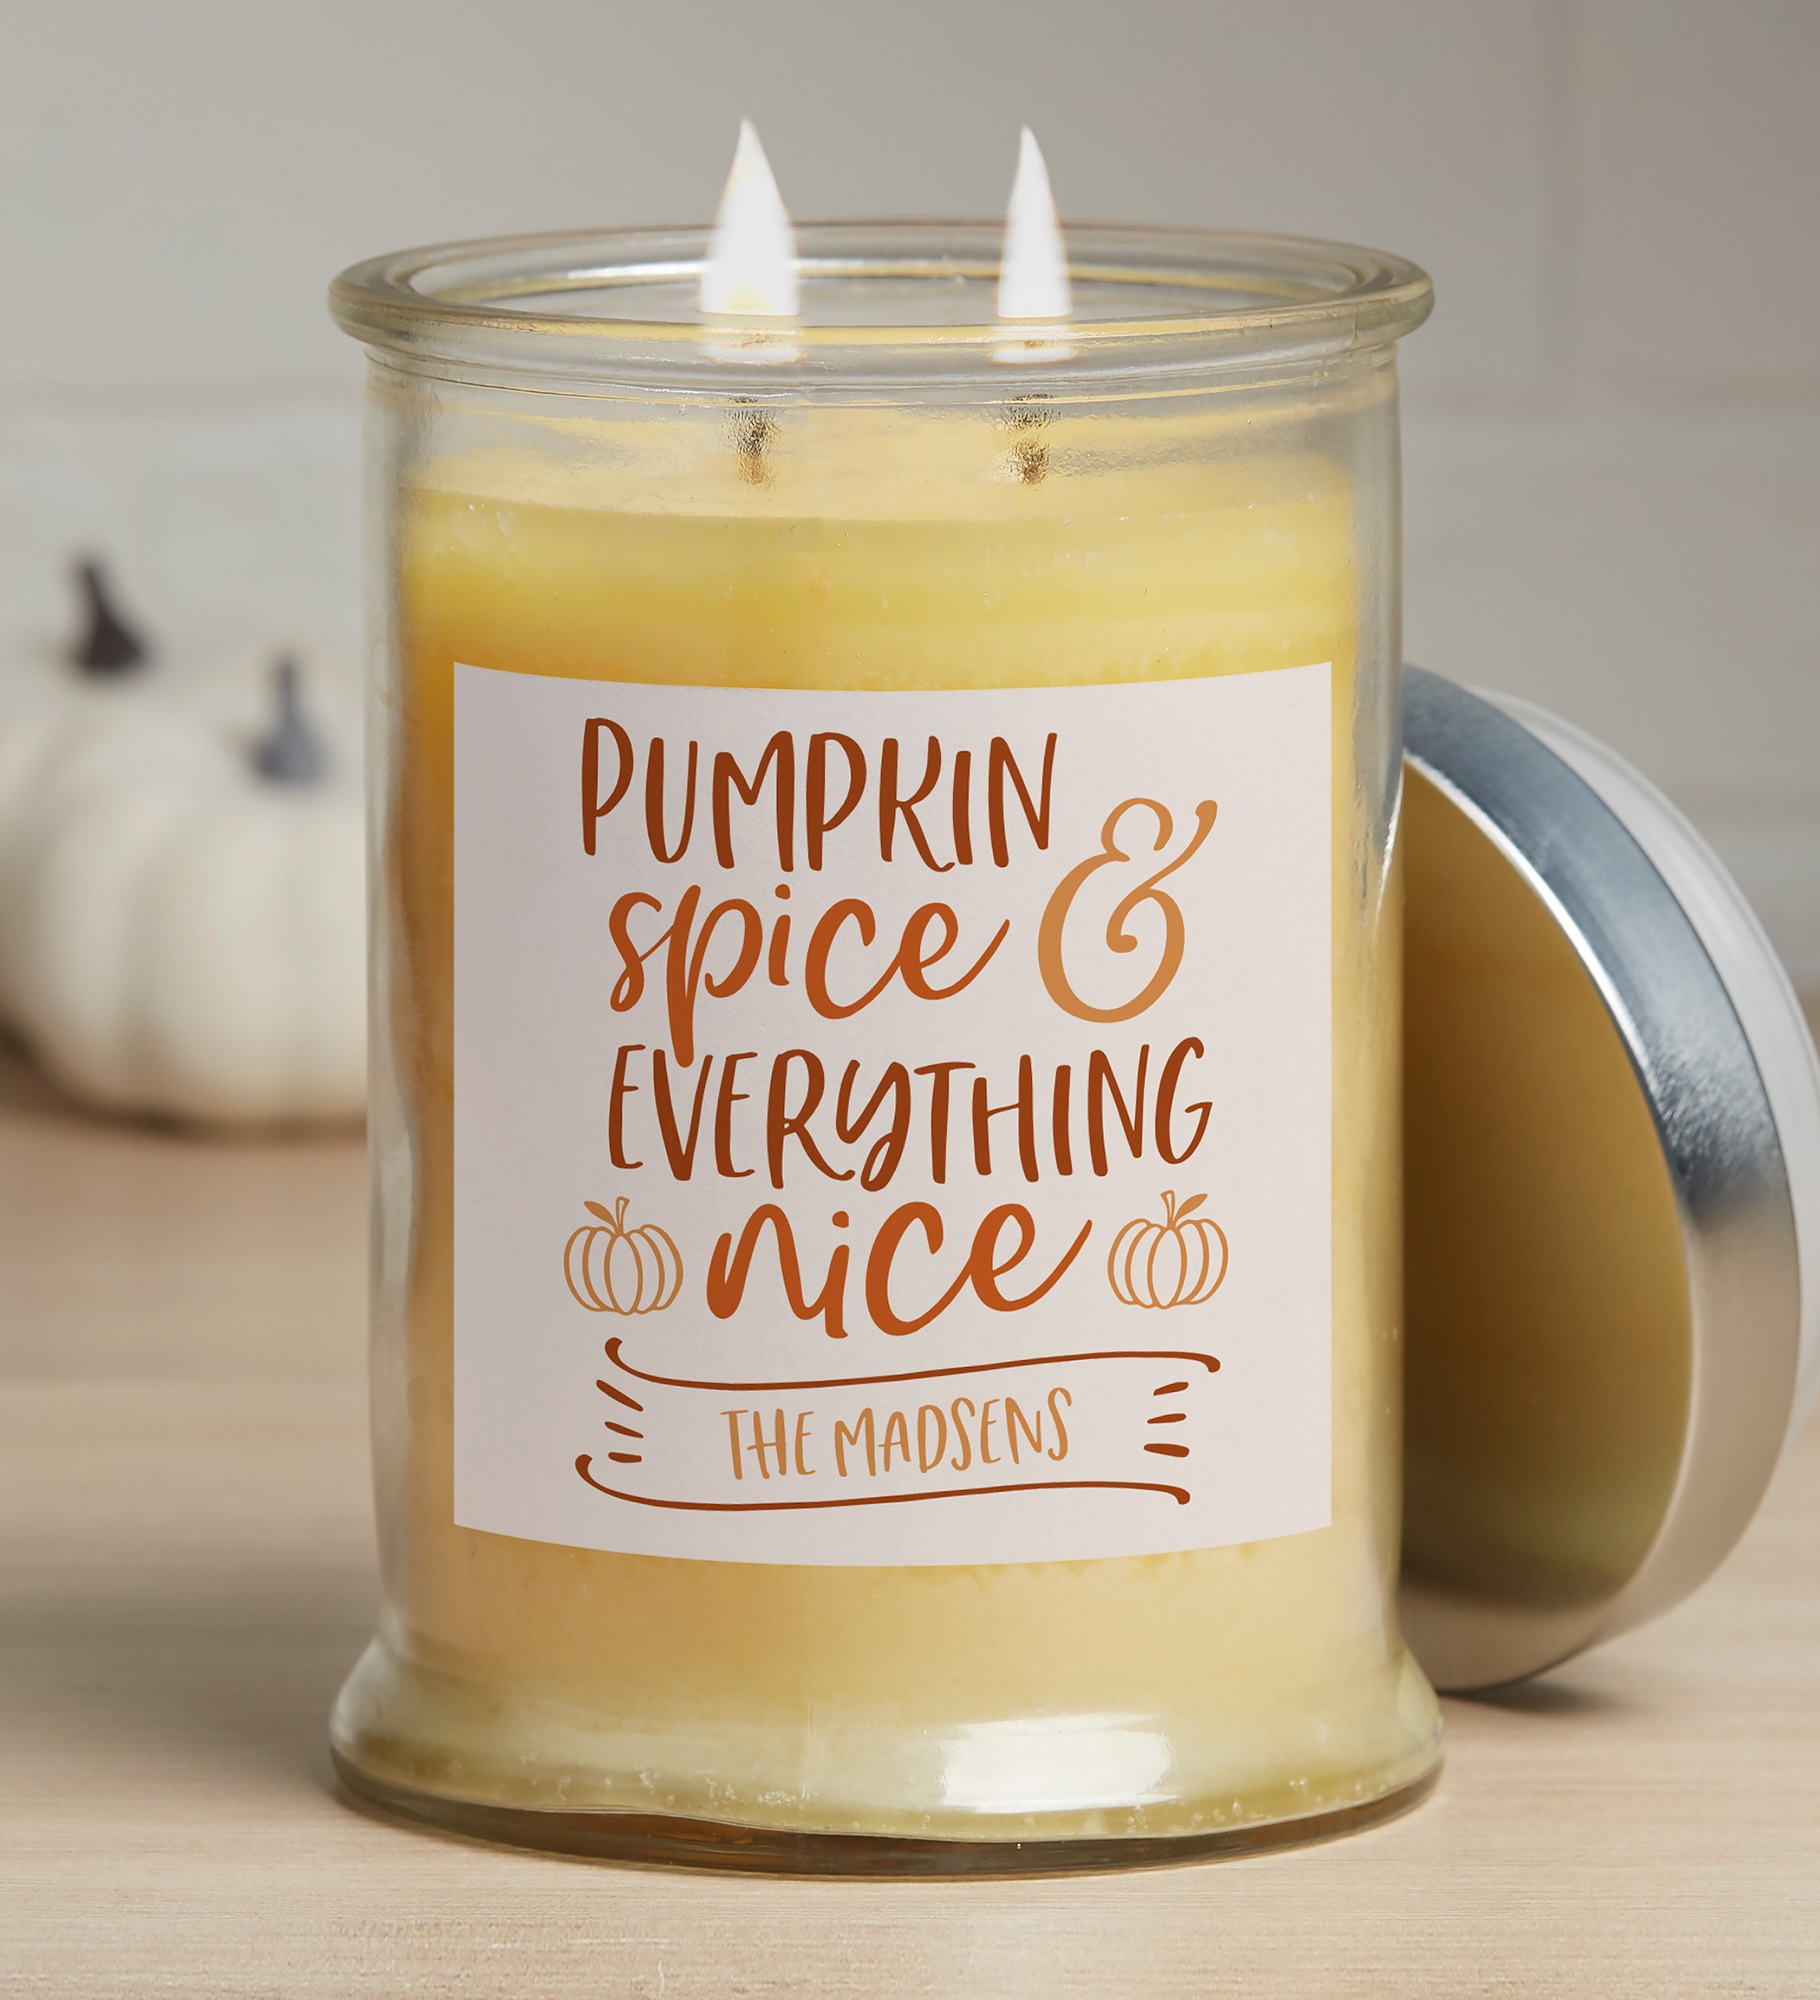 Pumpkin Spice & Everything Nice Personalized Candle Jar